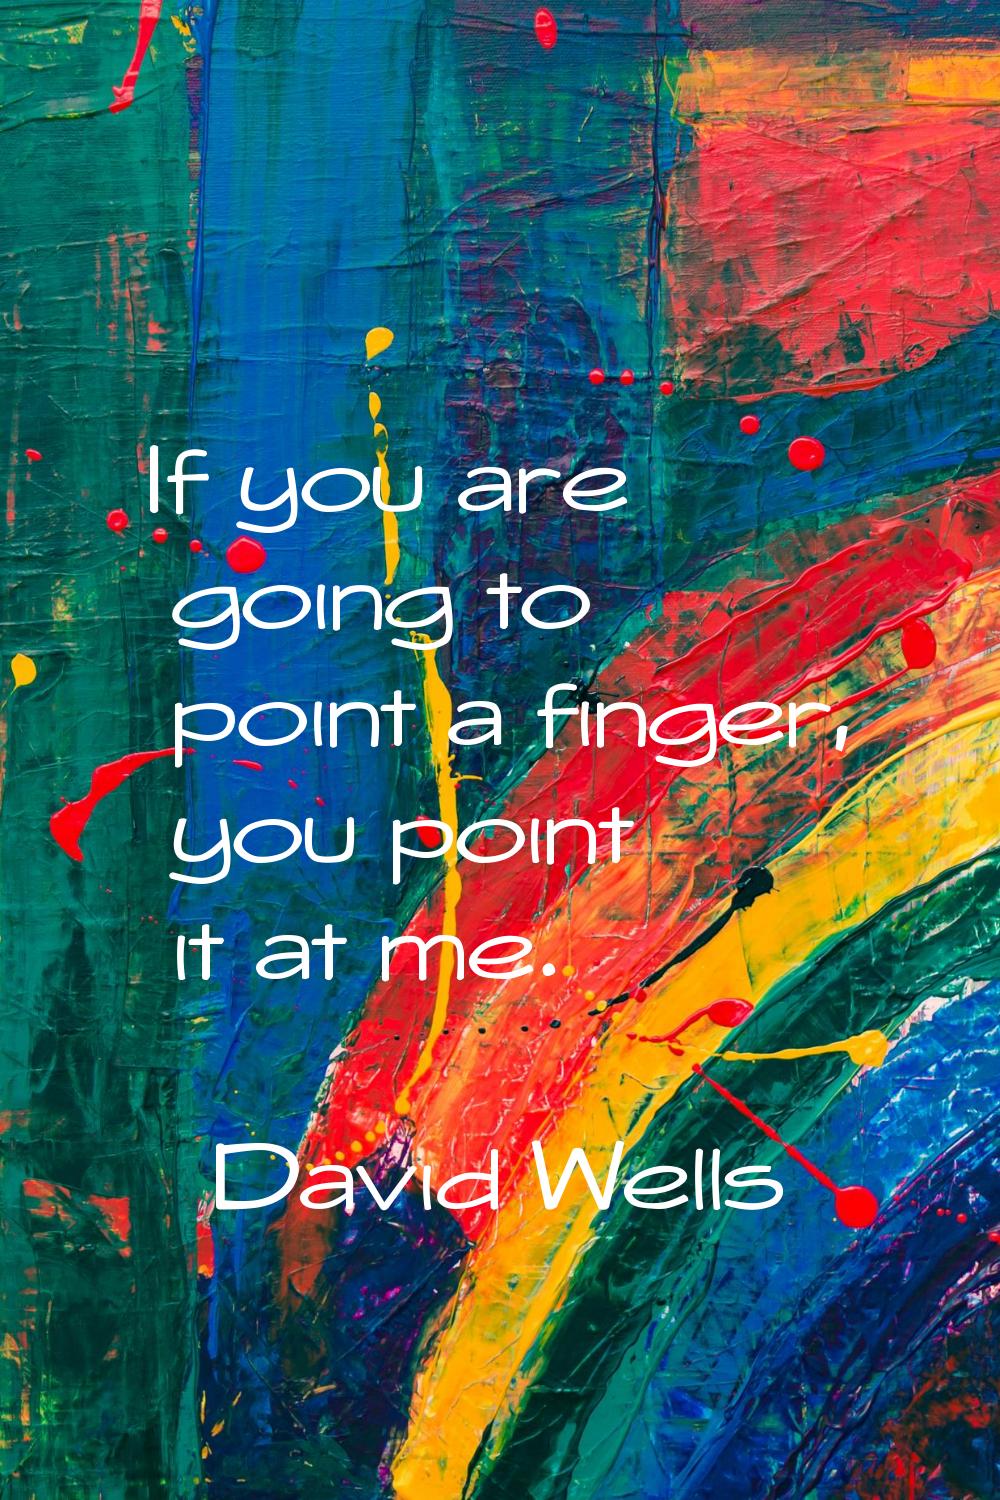 If you are going to point a finger, you point it at me.